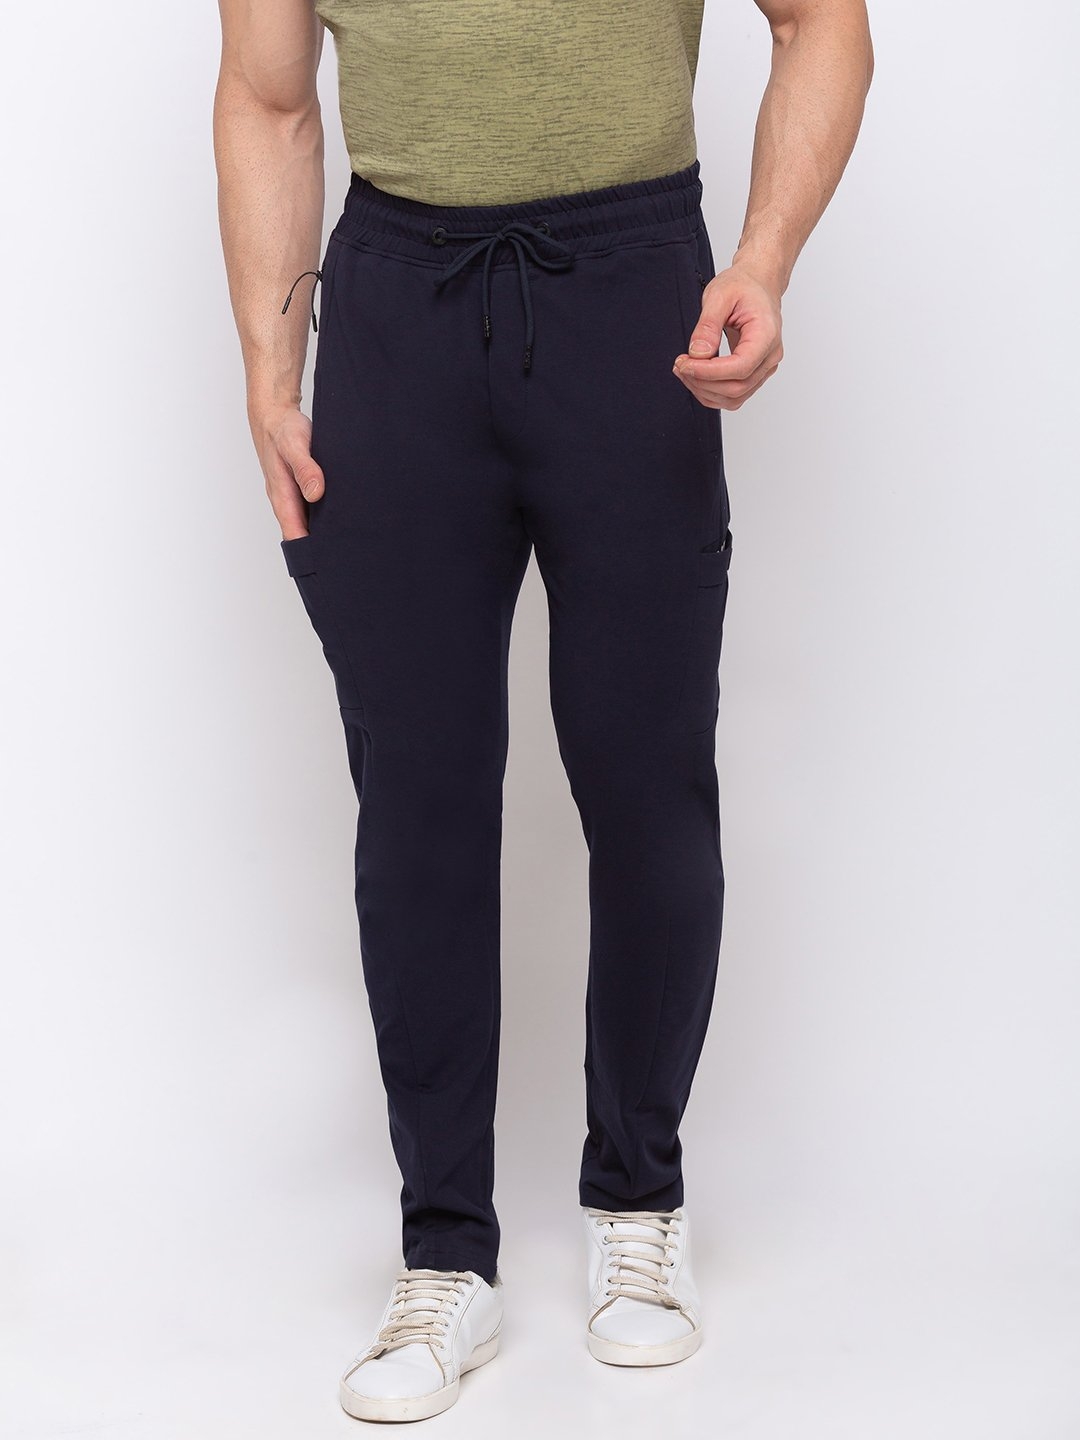 Status Quo | Navy Blue Solid Regular Fit Track Pants